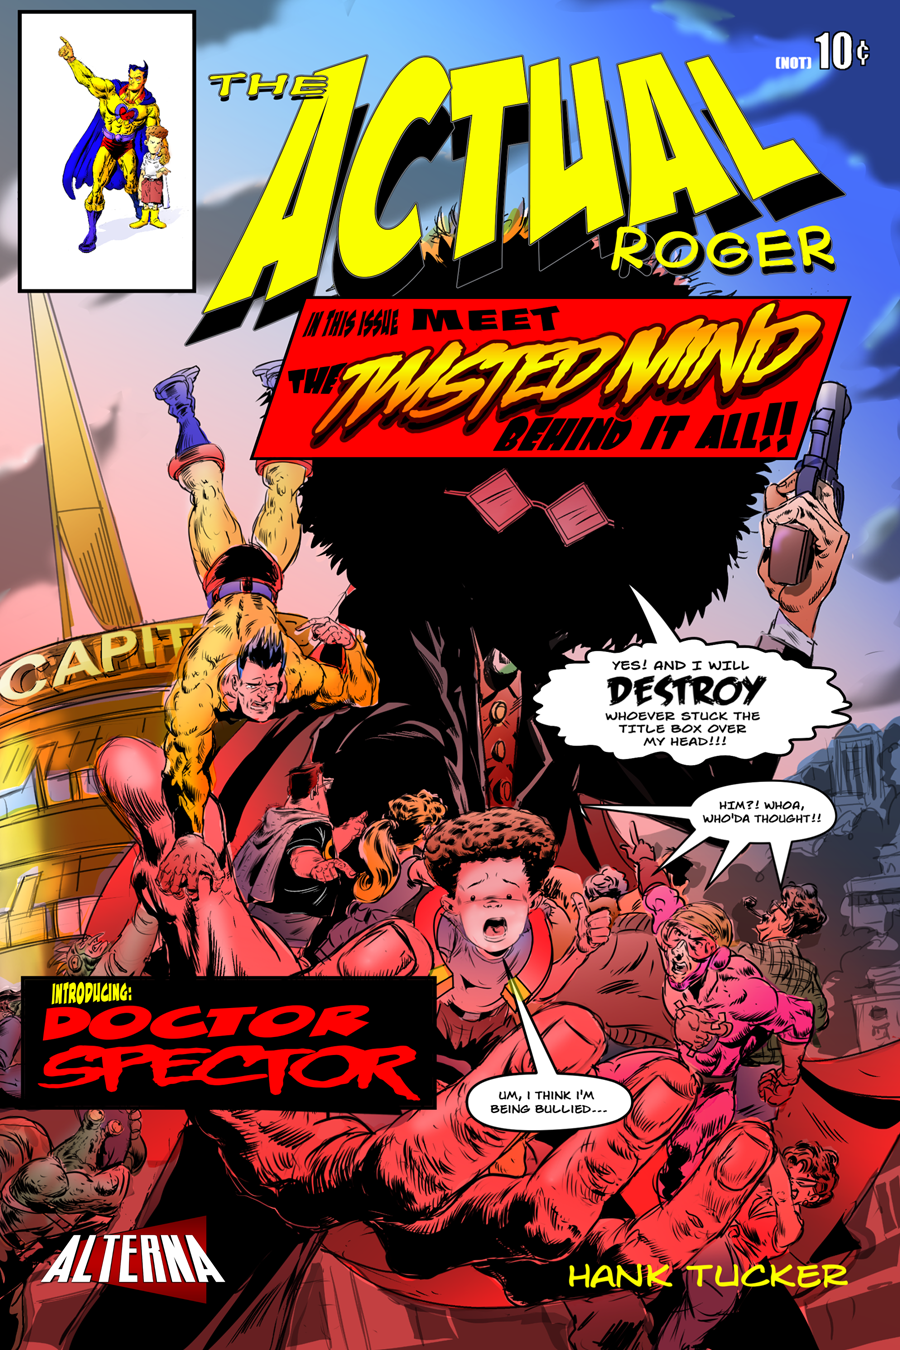 The Actual Roger #4 Cover